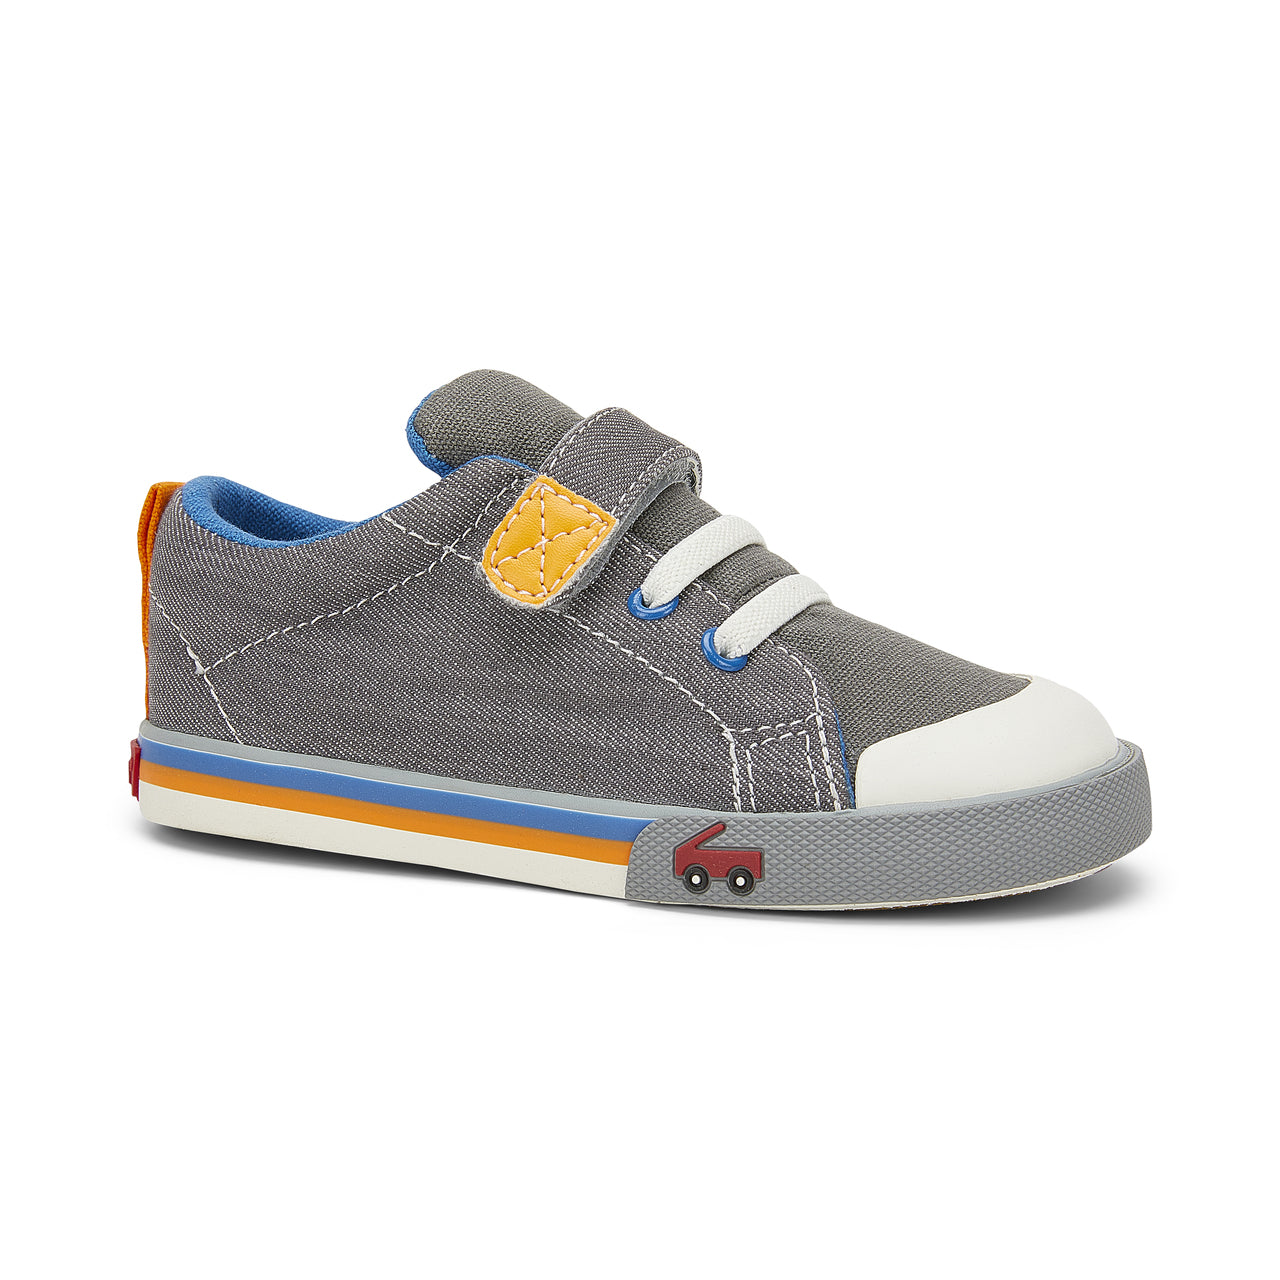 Discover this fan-favorite boys’ sneaker and see why it’s been a best-seller season after season. Classic styling and lightweight, flexible materials make the Stevie the go-to shoe for any activity.